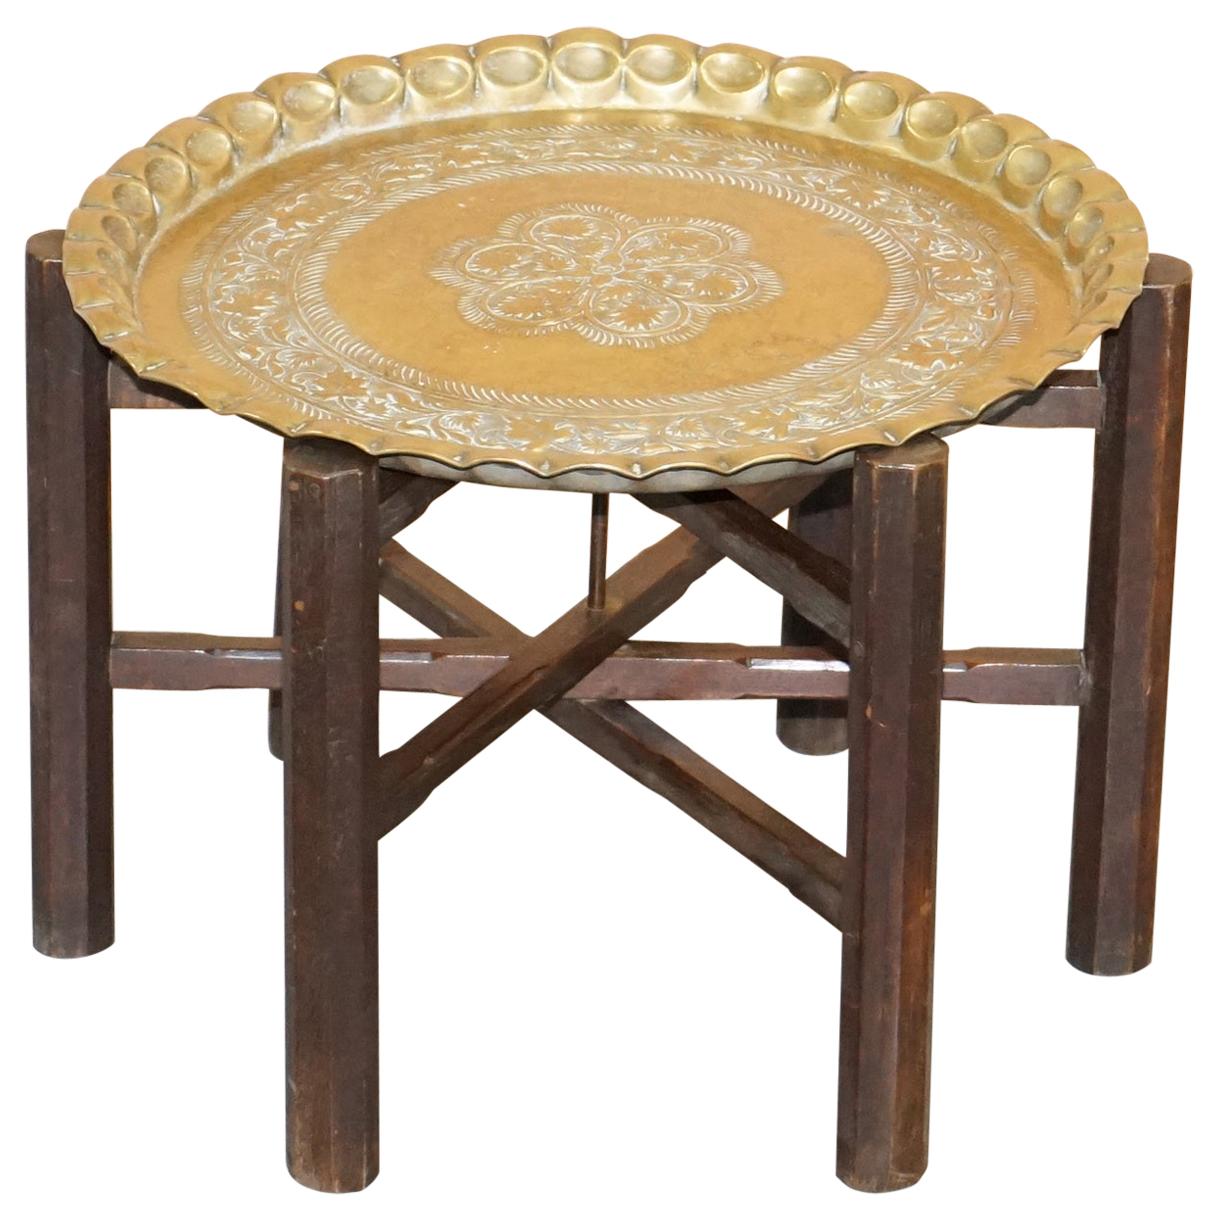 Very Rare circa 1920-1940 Persian Moroccan Brass Topped Folding Occasional Table For Sale